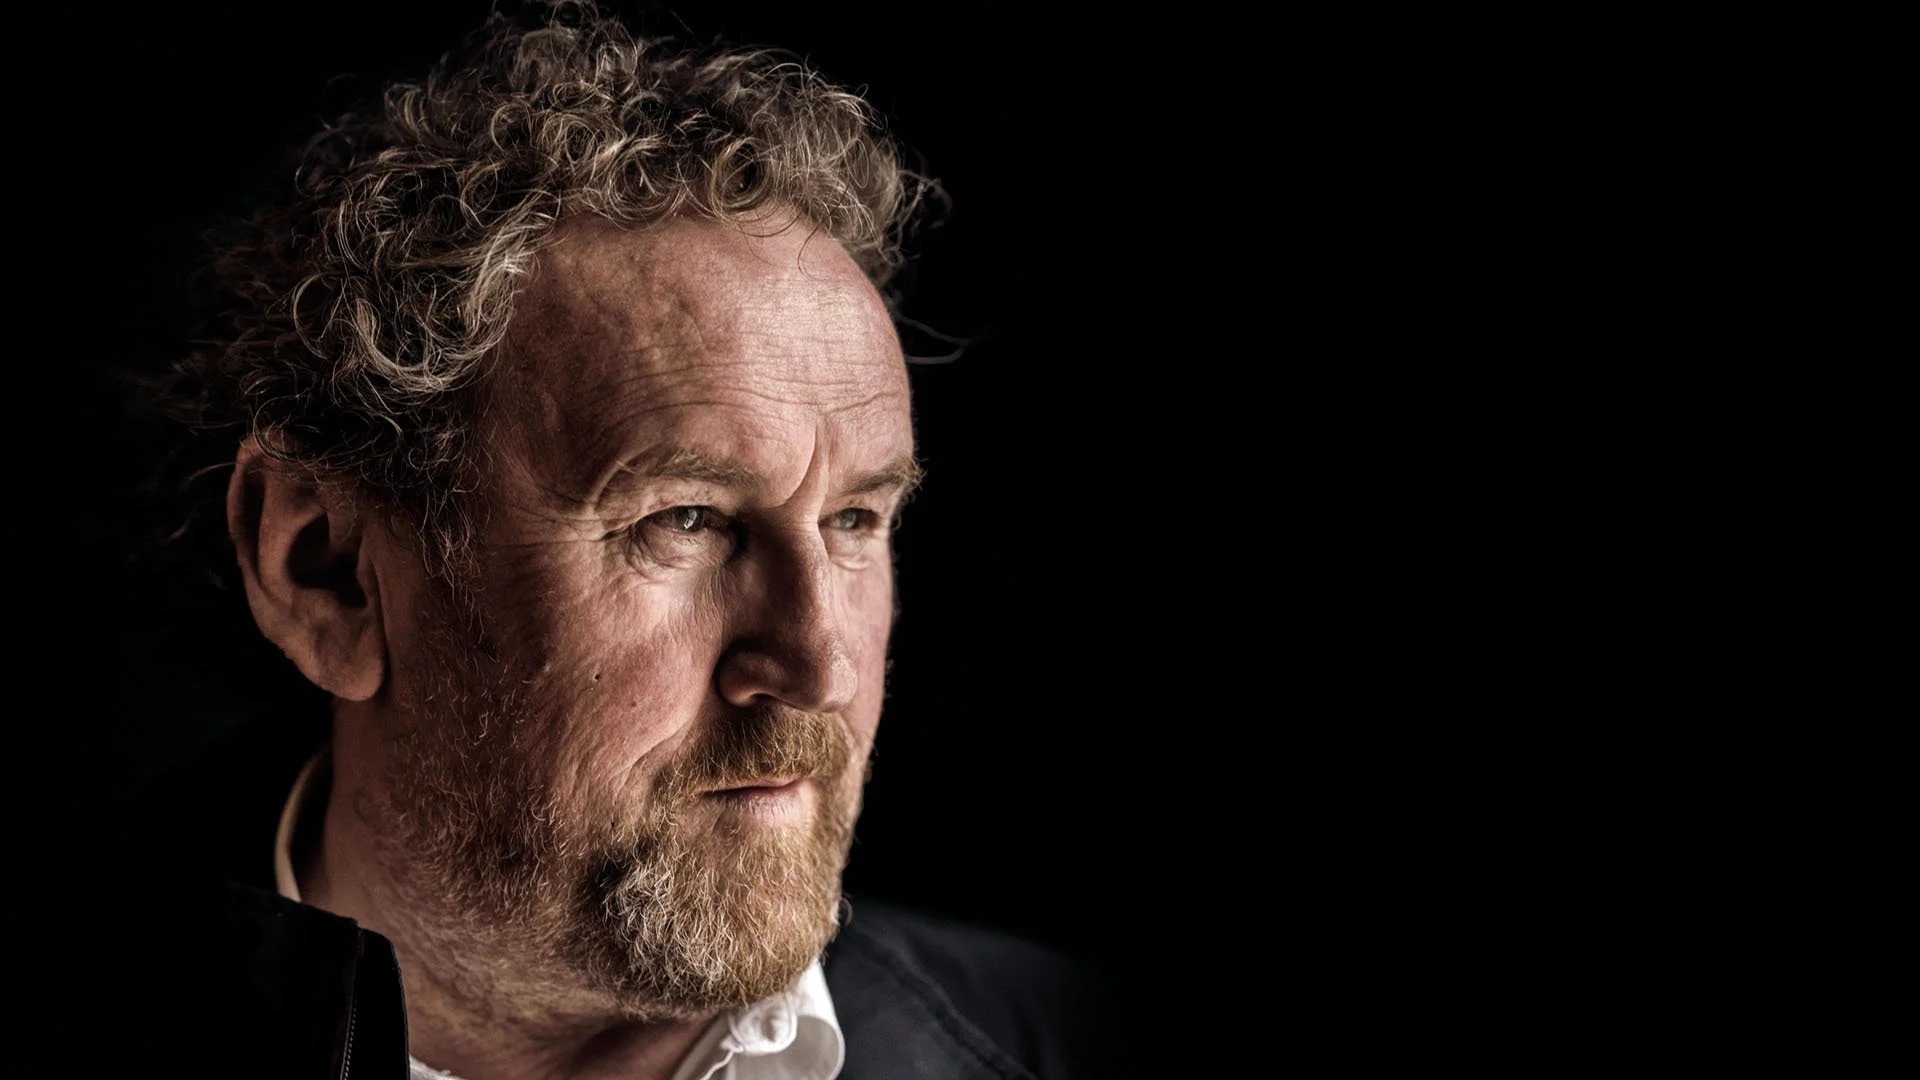 Colm Meaney (Miles O'Brien) looking pensive black background Blank Meme Template